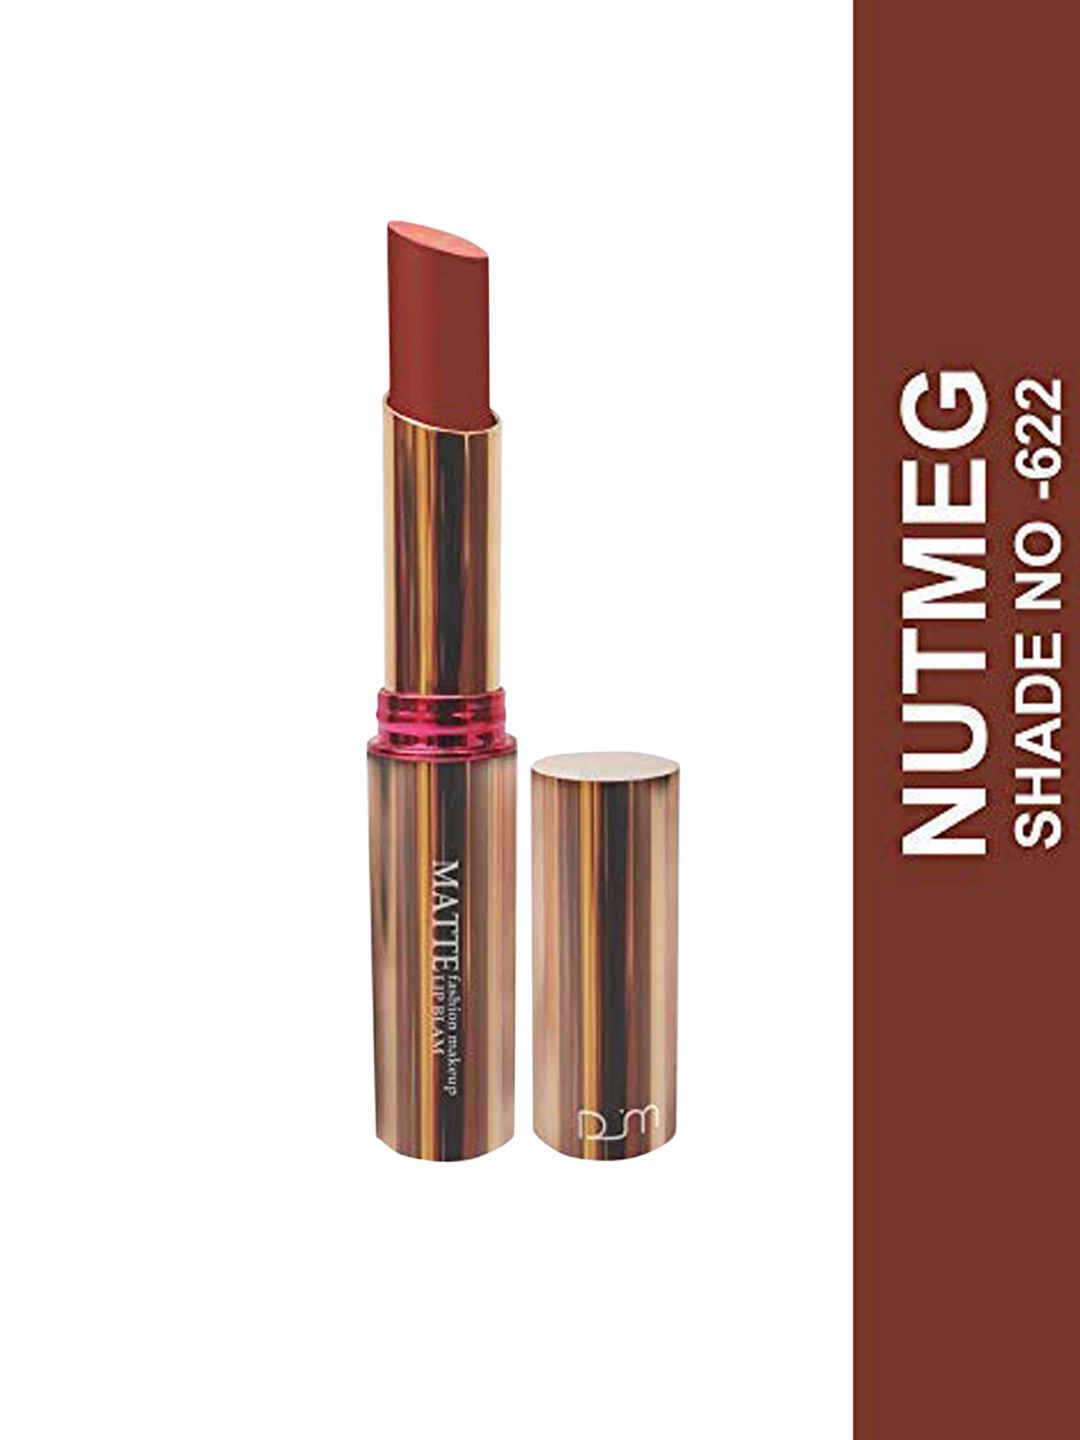 Seven Seas Matte With You Lipstick, 3.8g - Nutmeg Price in India